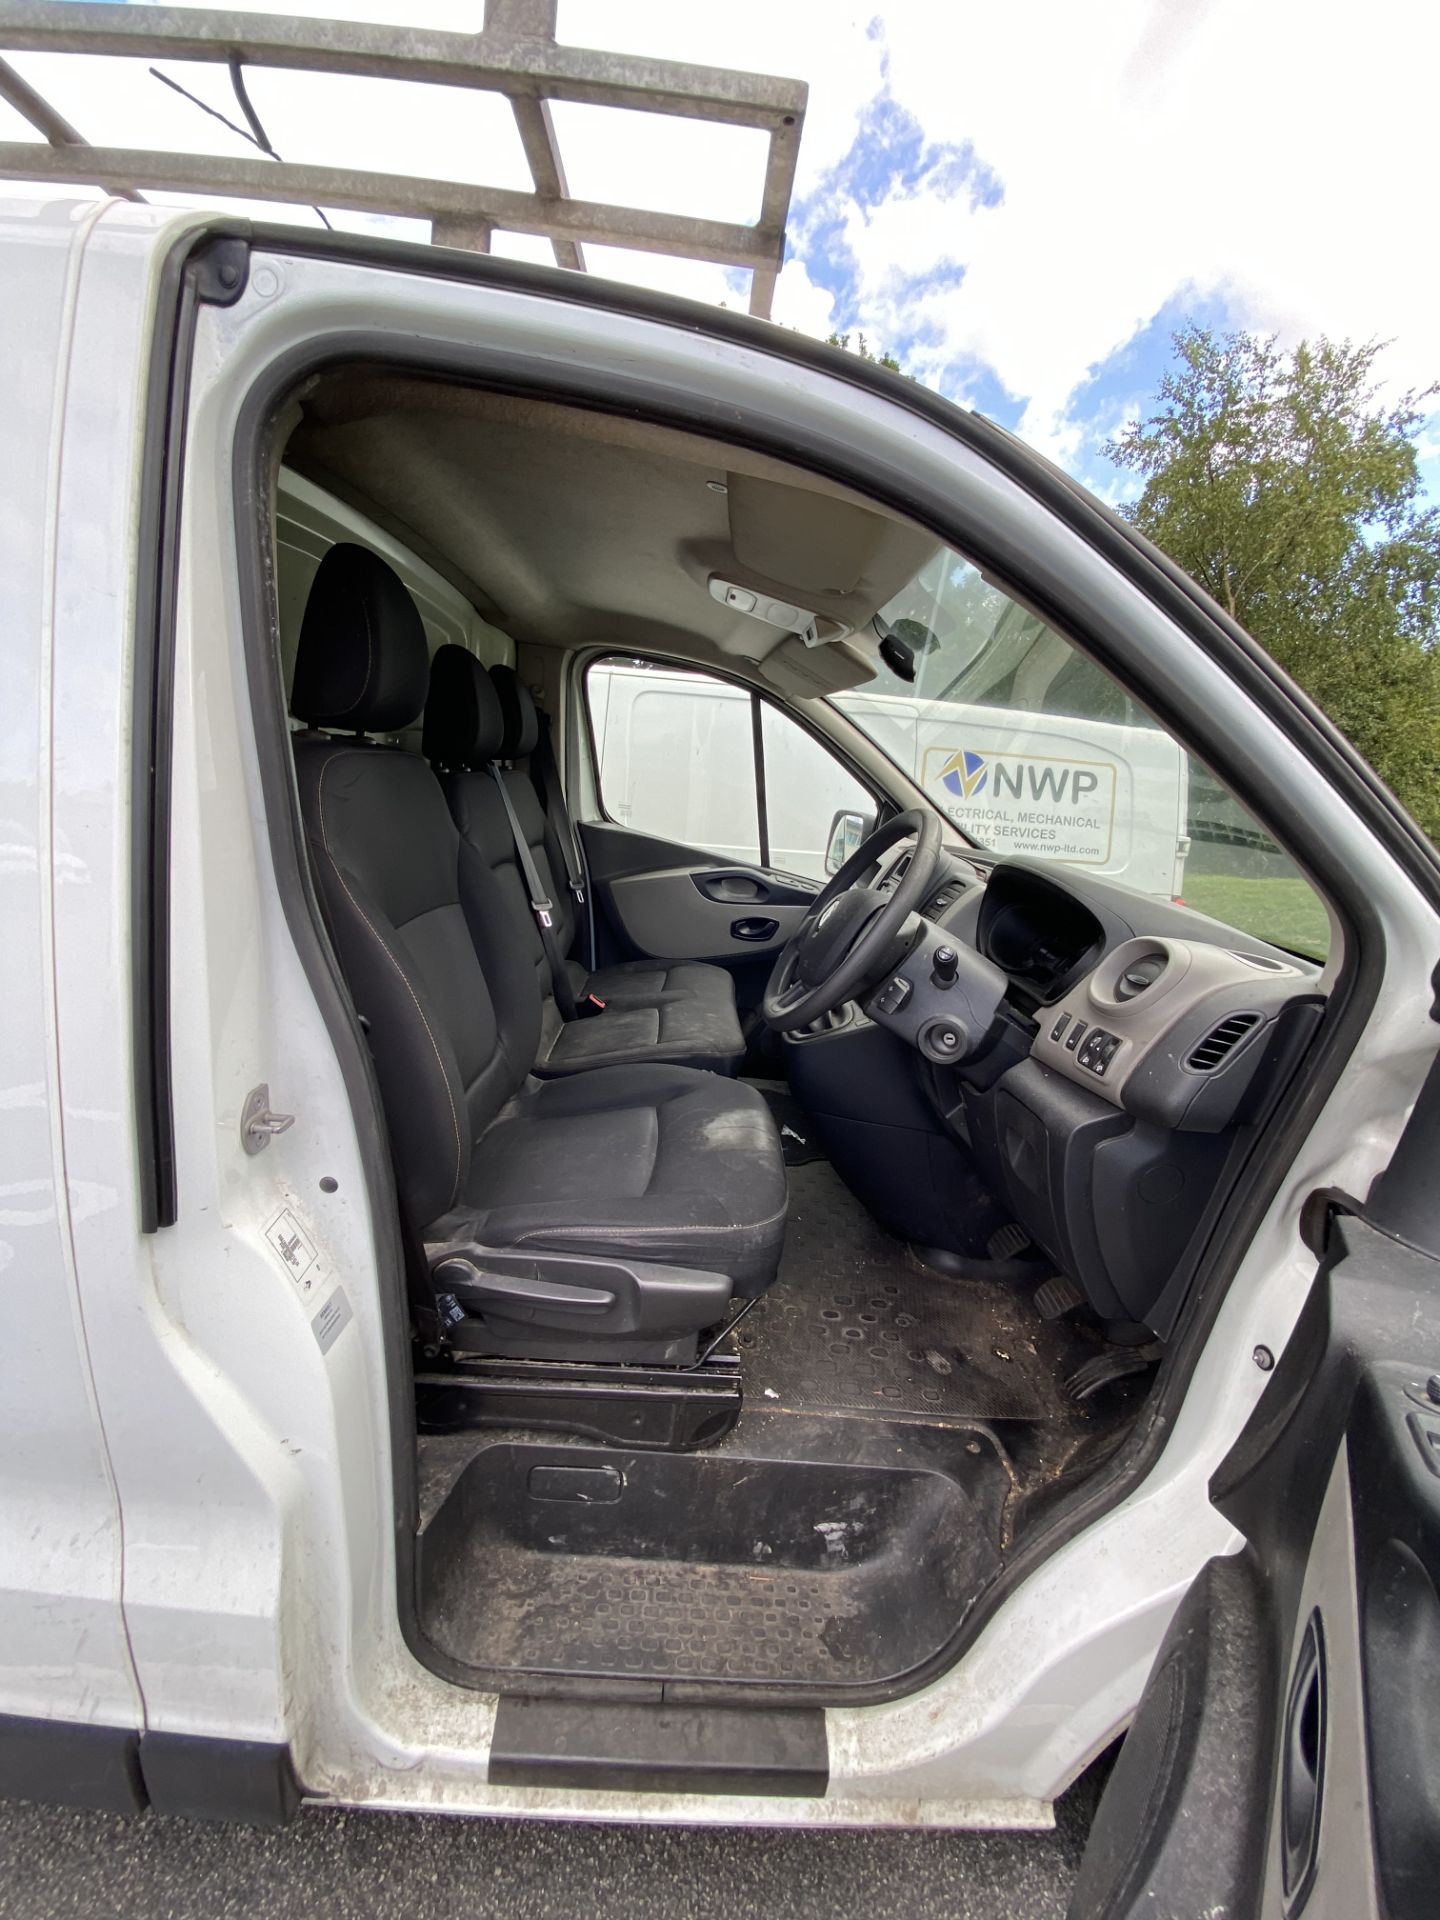 Renault Trafic SL27 Business DCi Diesel Panel Van, registration no. CX18 XHH, date first - Image 7 of 8